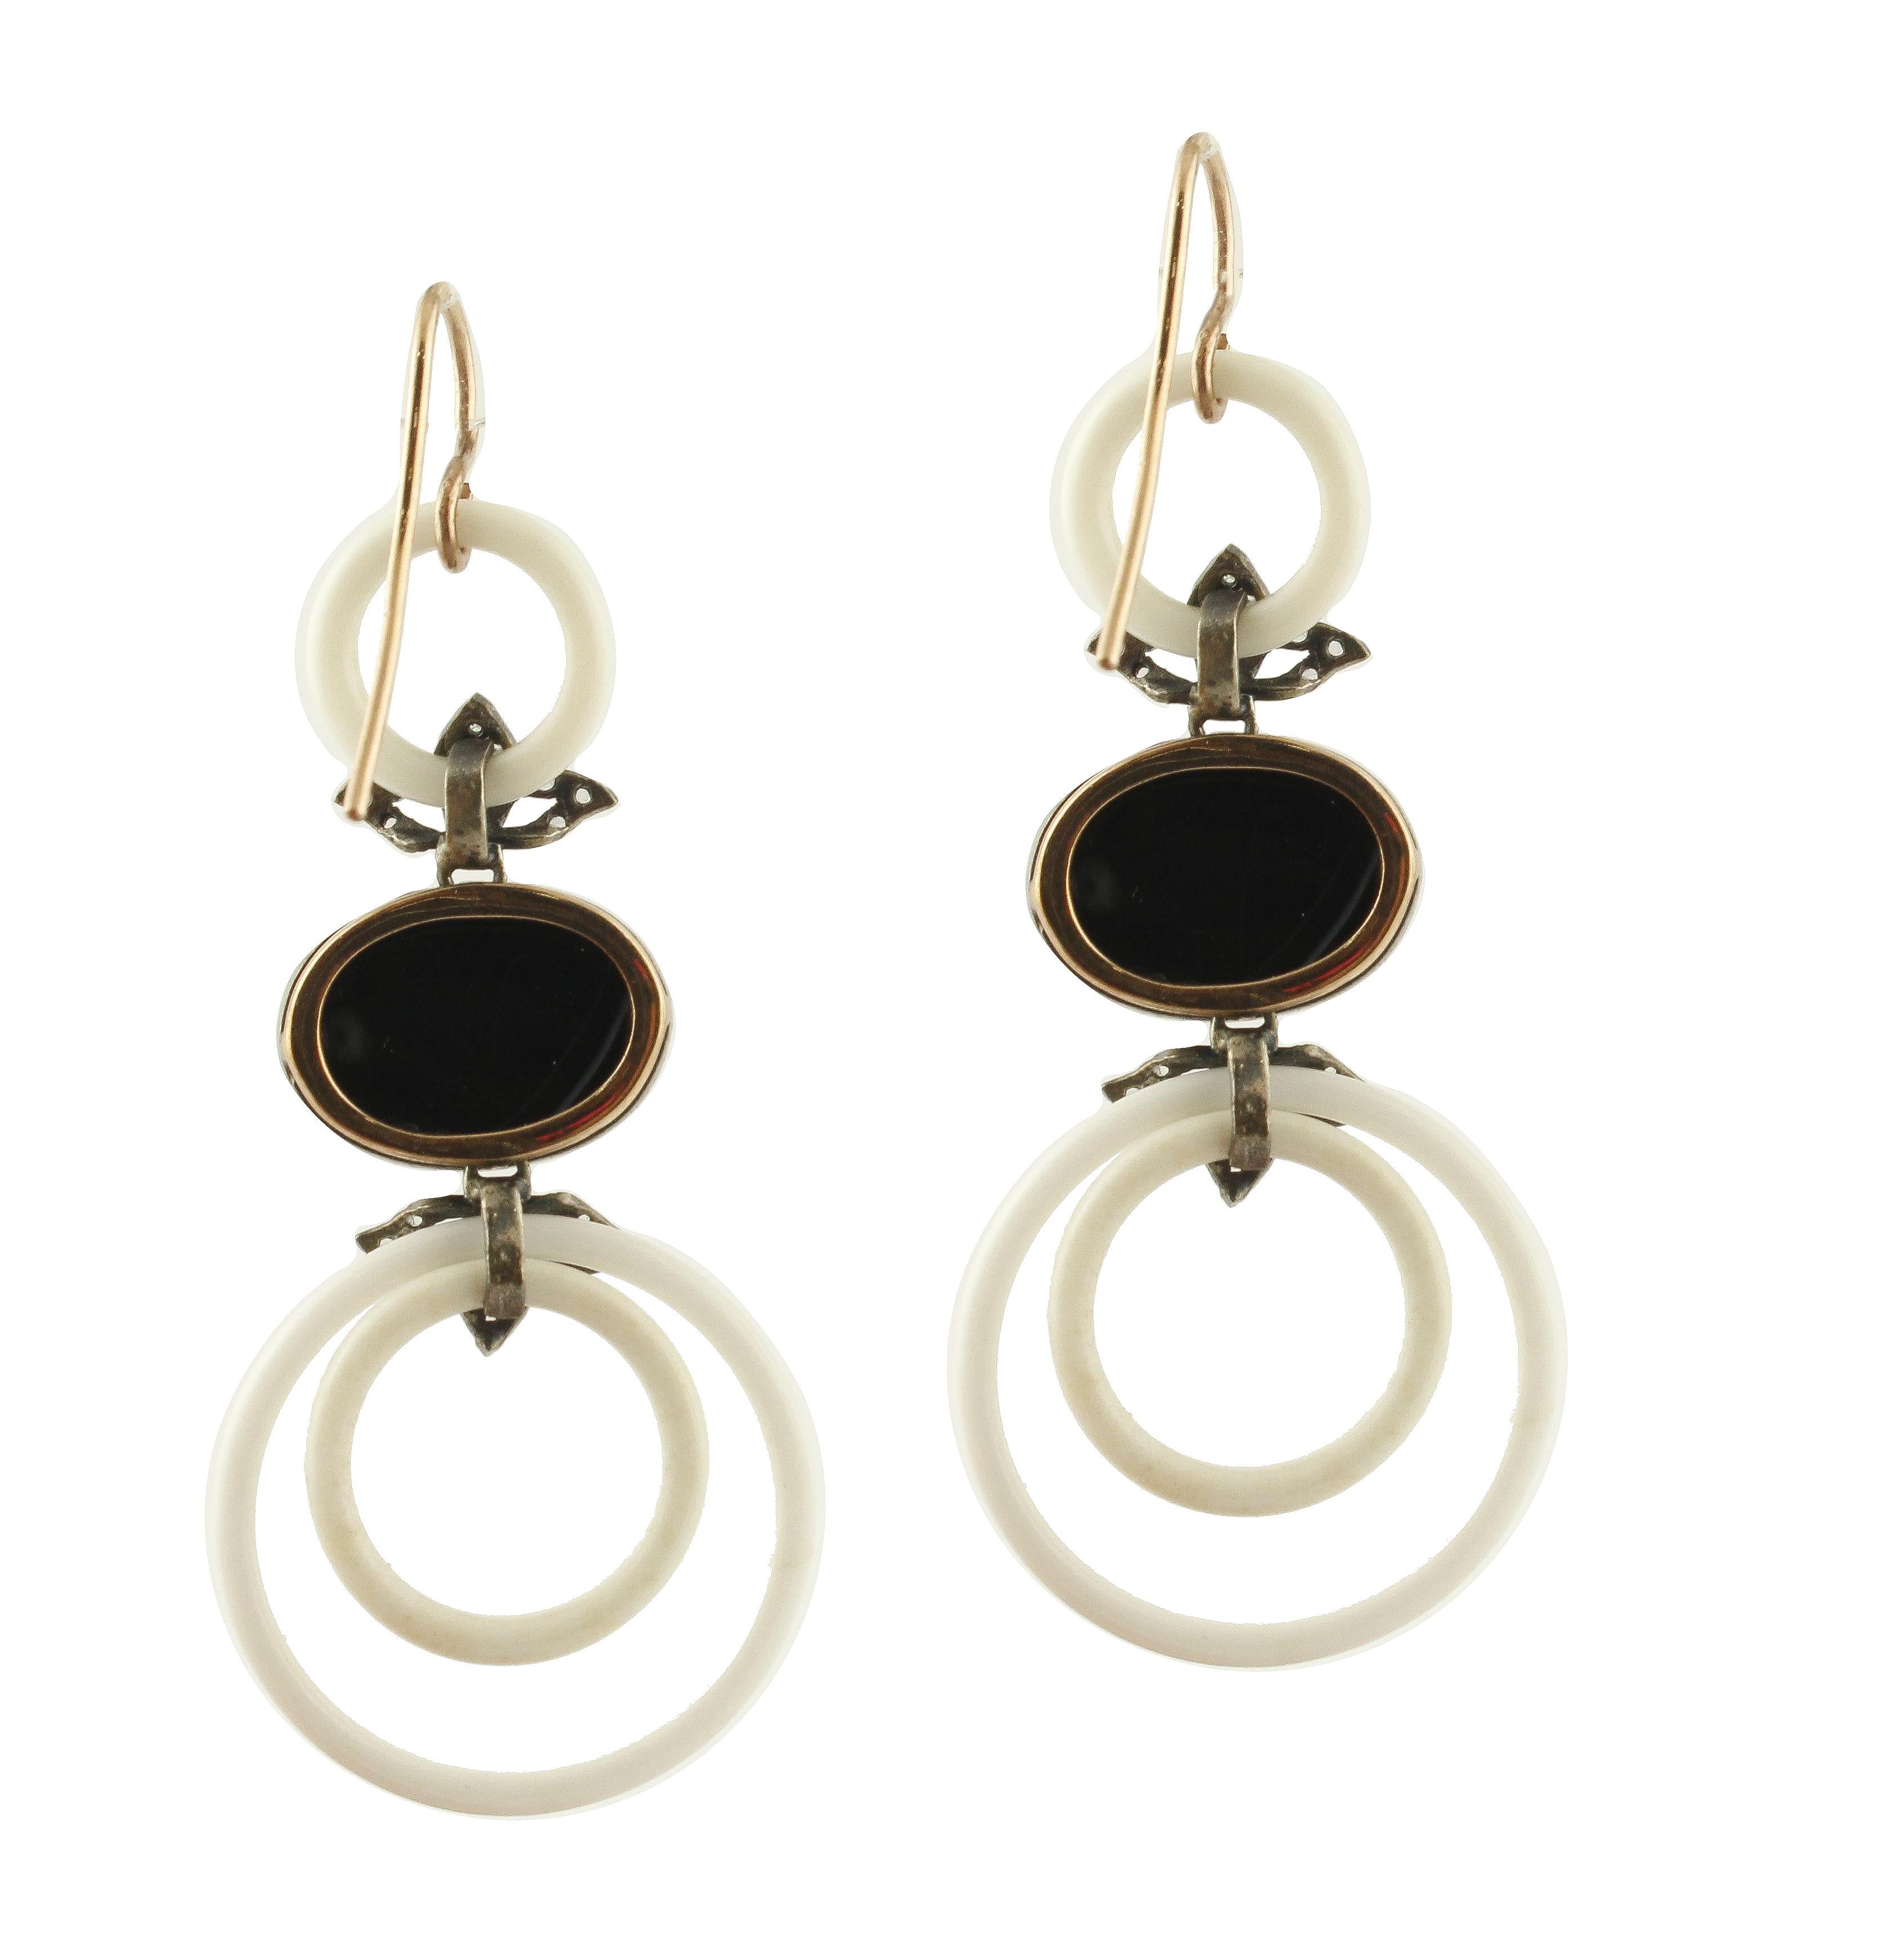 Charming earrings in 9 ct rose gold and silver, very special in their kind, 7.5 cm long, represent many white agate circles and 8.40 g onyx stones, details enriched with 0.47 ct diamonds. Total weight g15.26.
Diamonds ct 0.47
Hard stones (white